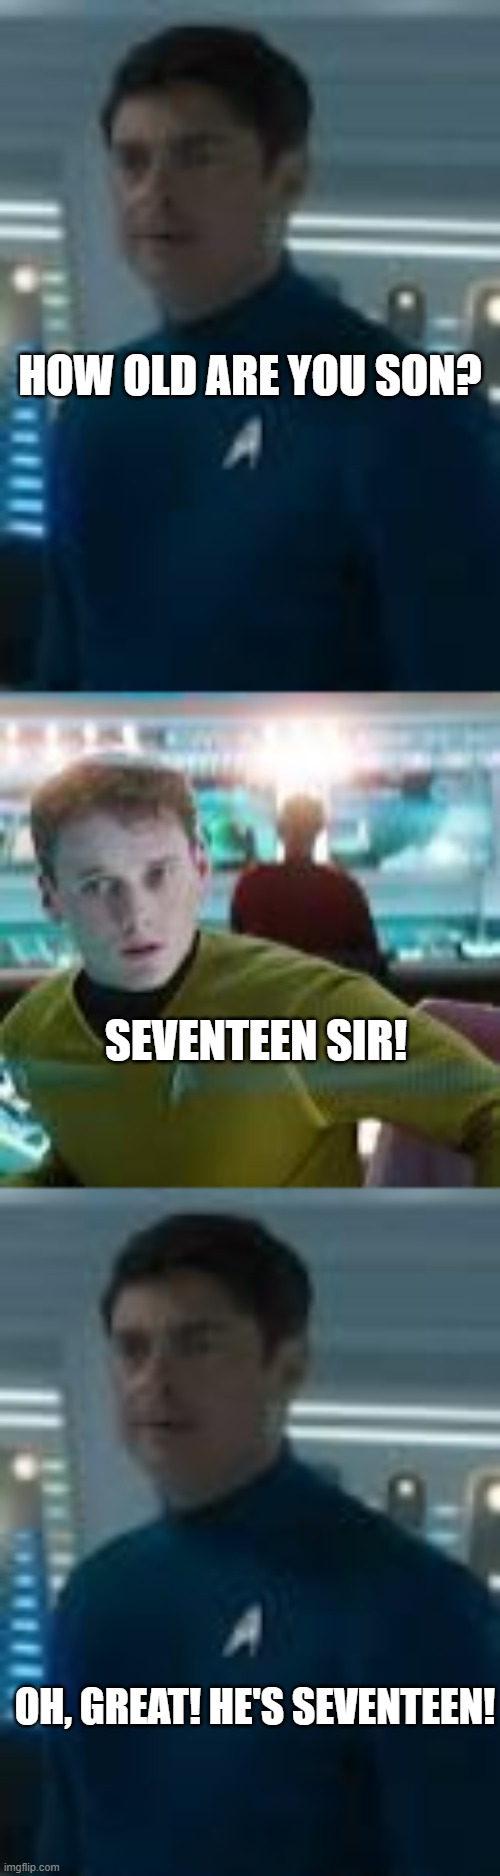 McCoy & Chekov | HOW OLD ARE YOU SON? SEVENTEEN SIR! OH, GREAT! HE'S SEVENTEEN! | image tagged in star trek | made w/ Imgflip meme maker